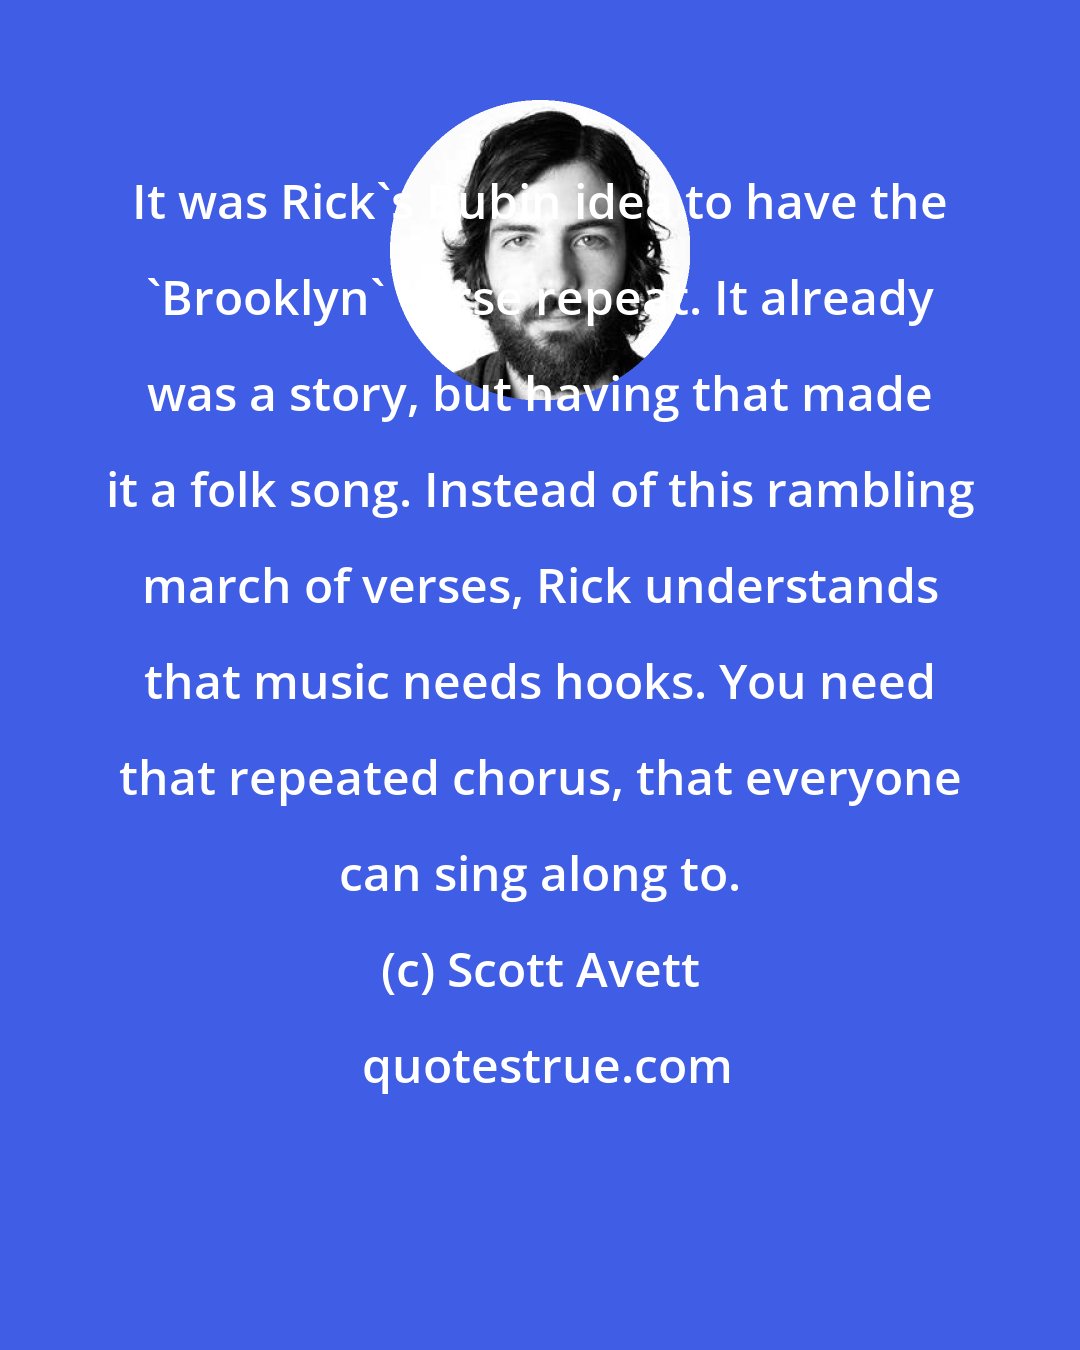 Scott Avett: It was Rick's Rubin idea to have the 'Brooklyn' verse repeat. It already was a story, but having that made it a folk song. Instead of this rambling march of verses, Rick understands that music needs hooks. You need that repeated chorus, that everyone can sing along to.